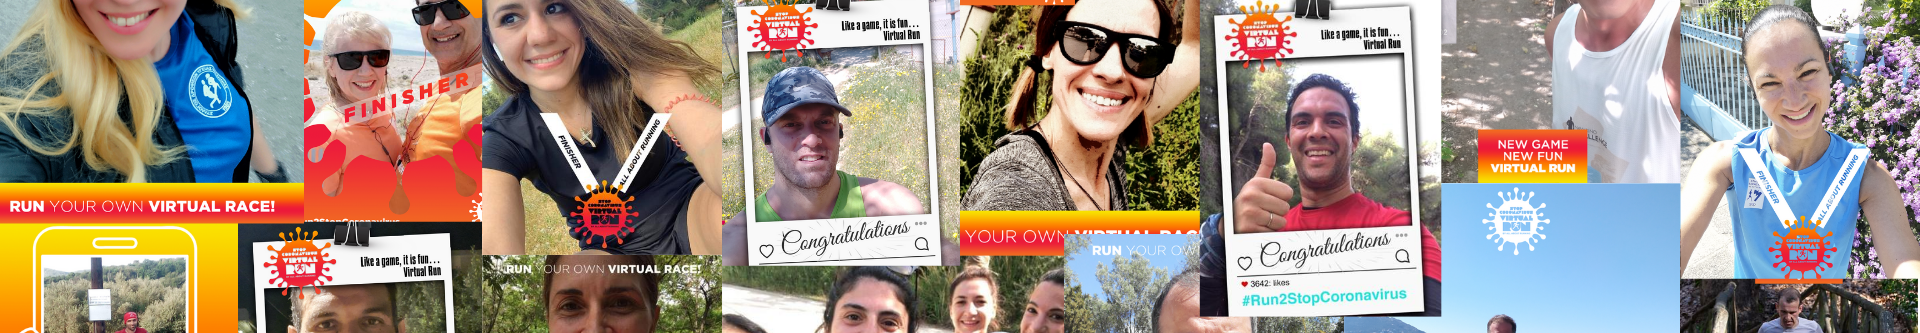 We asked runners to challenge friends via social media 1